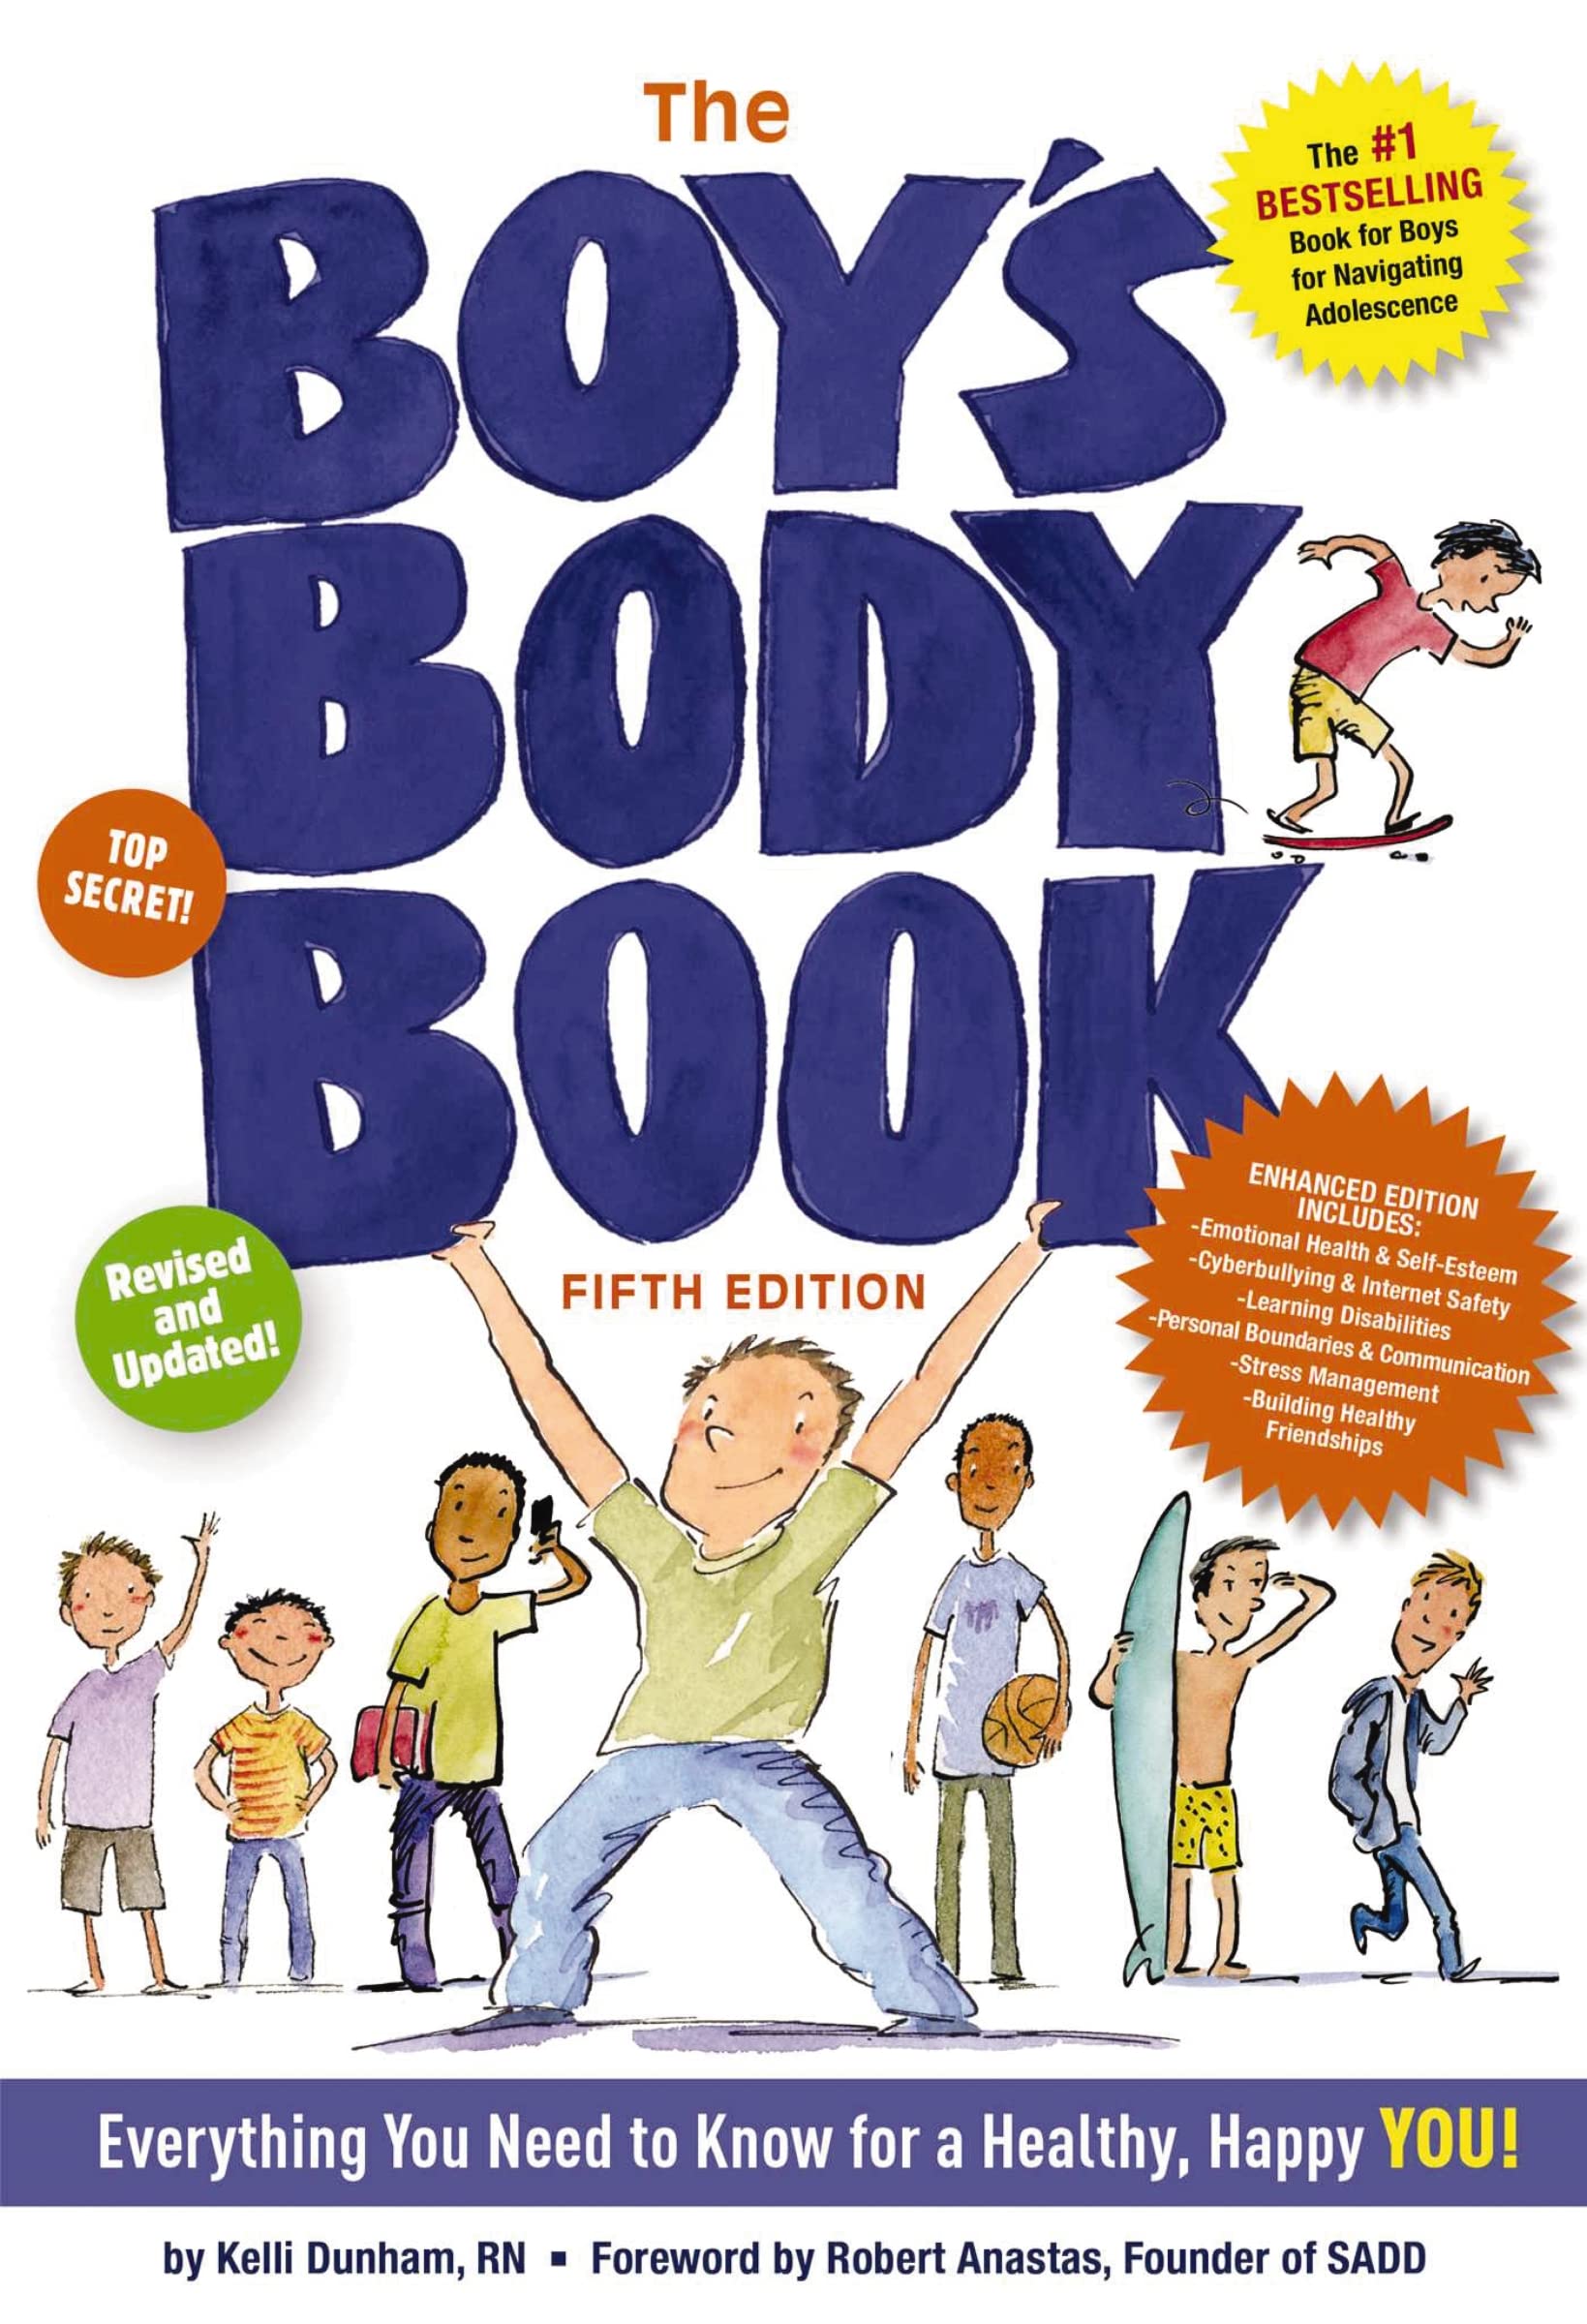 The Boy's Body Book (Fifth Edition): Everything You Need to Know for Growing Up! by Dunham, Kelli